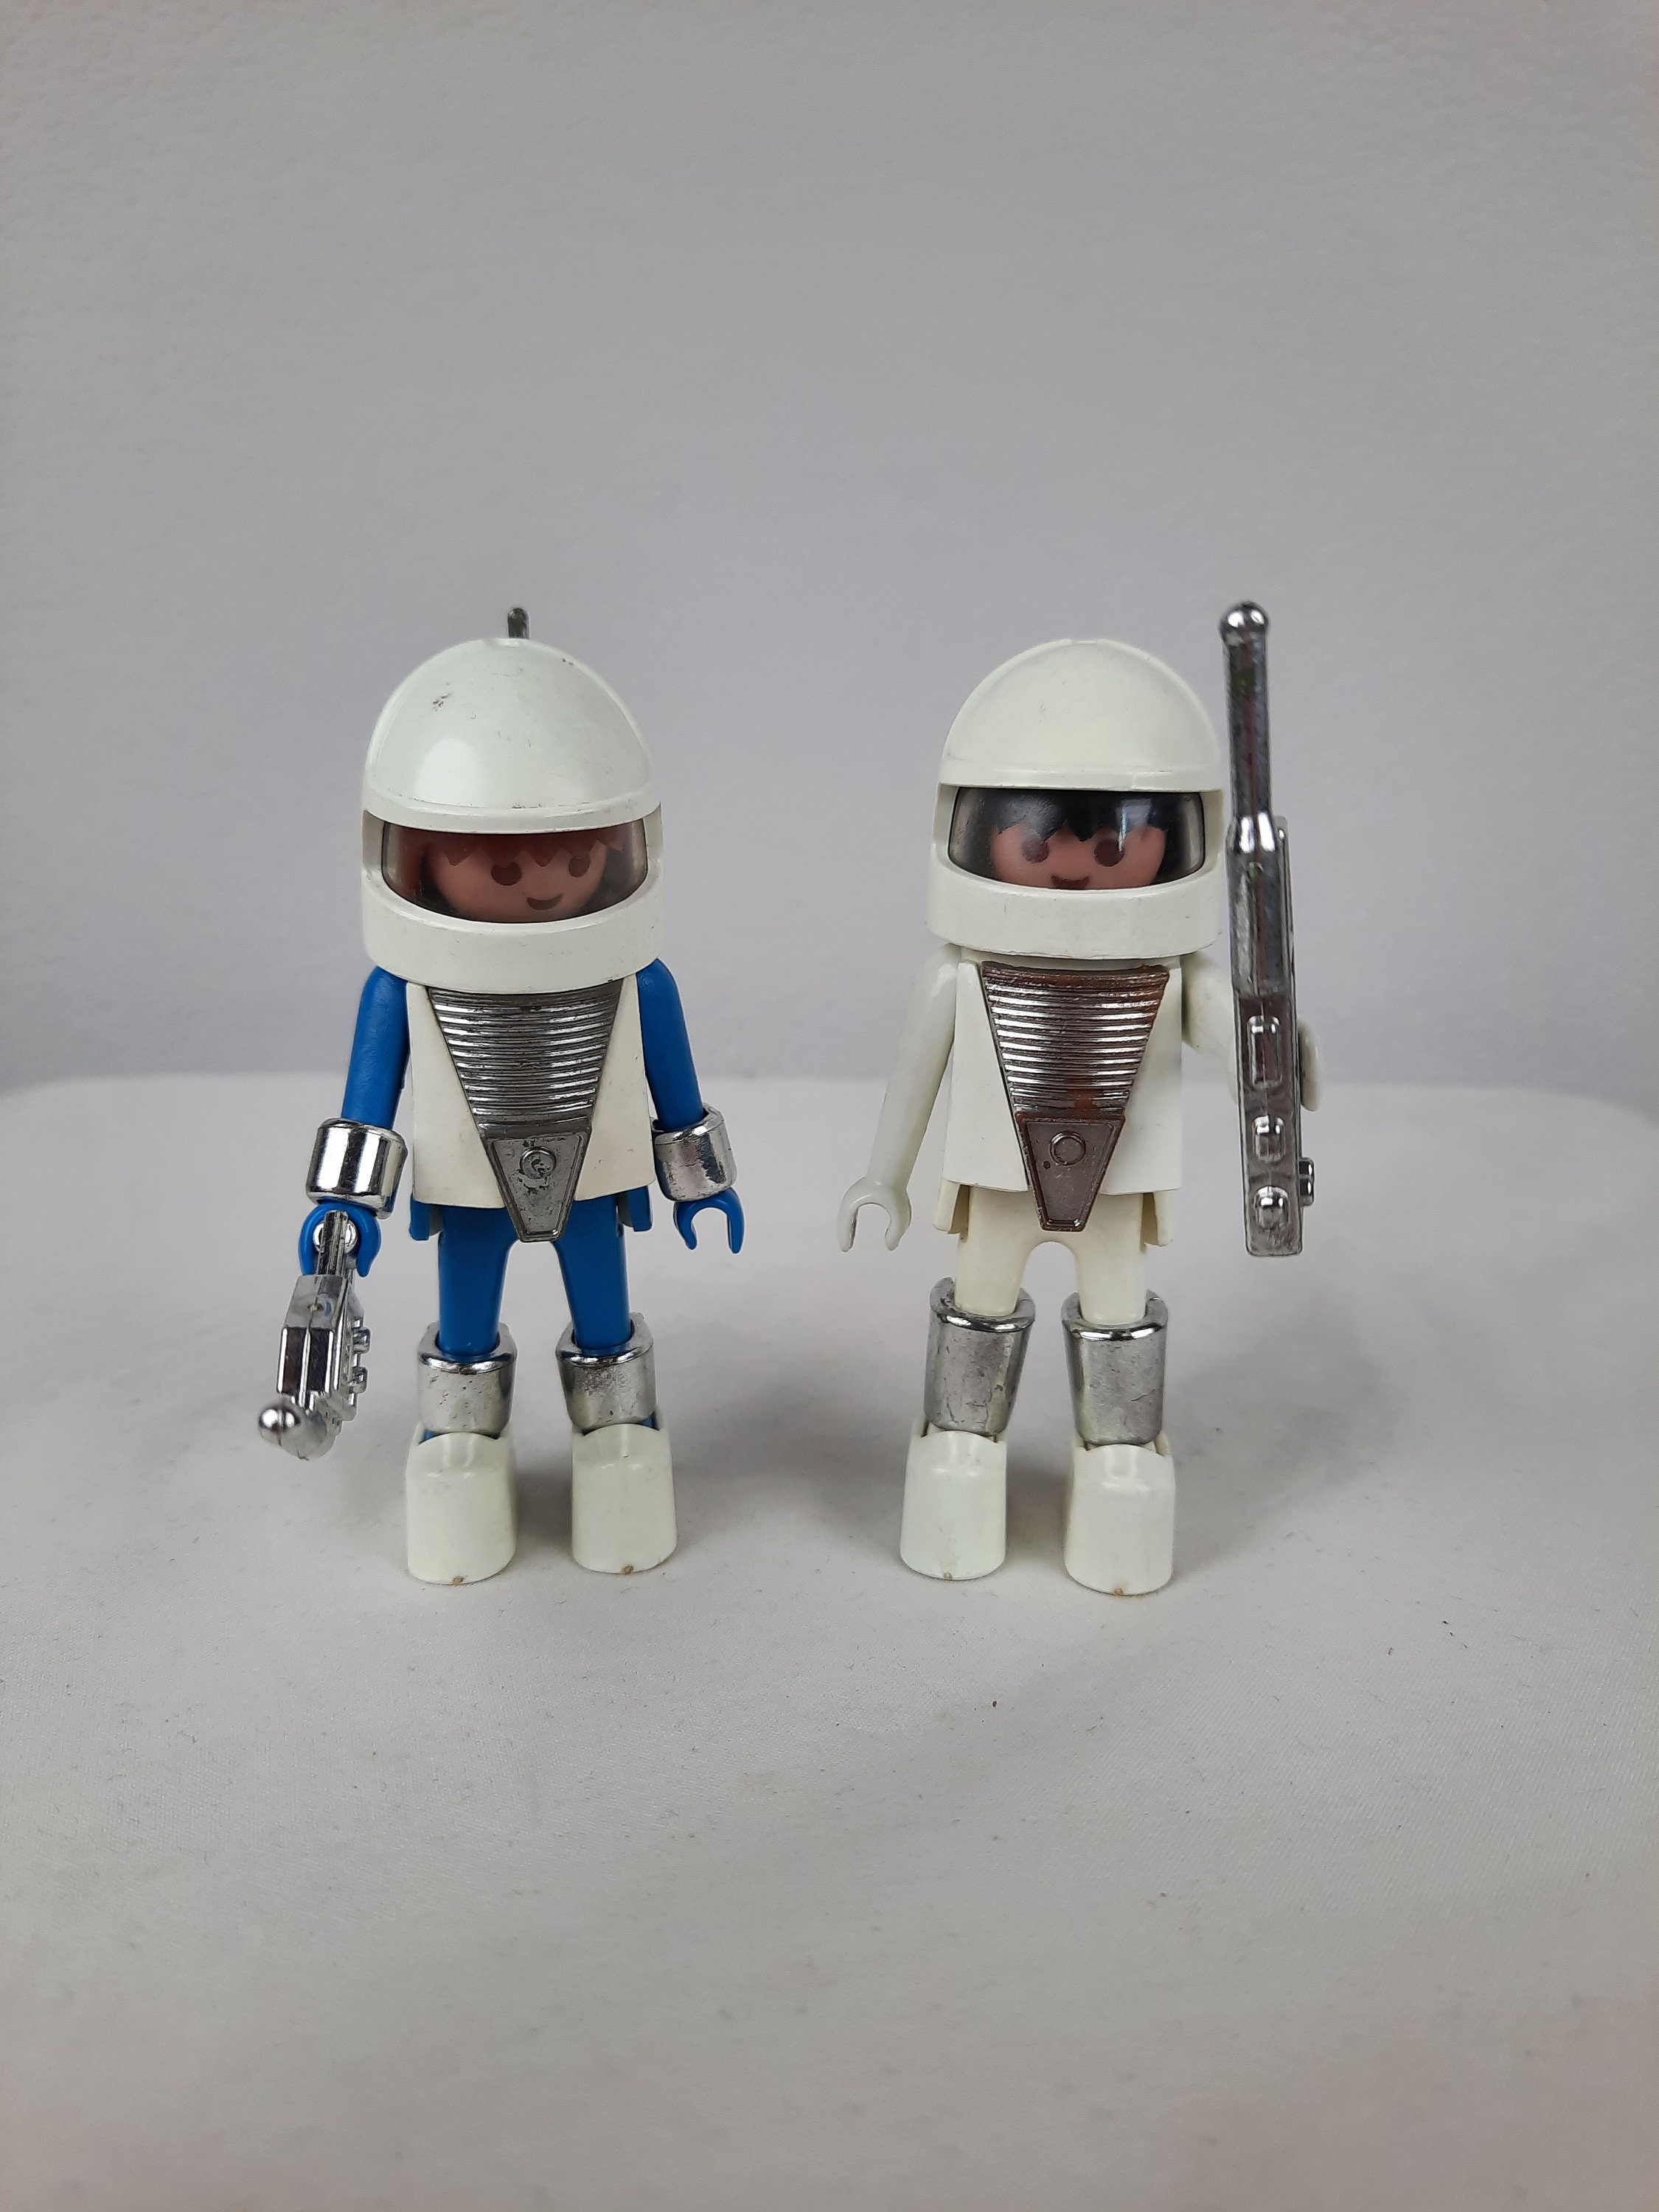 Vplaymospace Playmobil Playmo Space Ship RF Y 162 Action Figure Vintage  Playmobil 3534 Lunar Lander and the Little Space Mobile for Free Now 